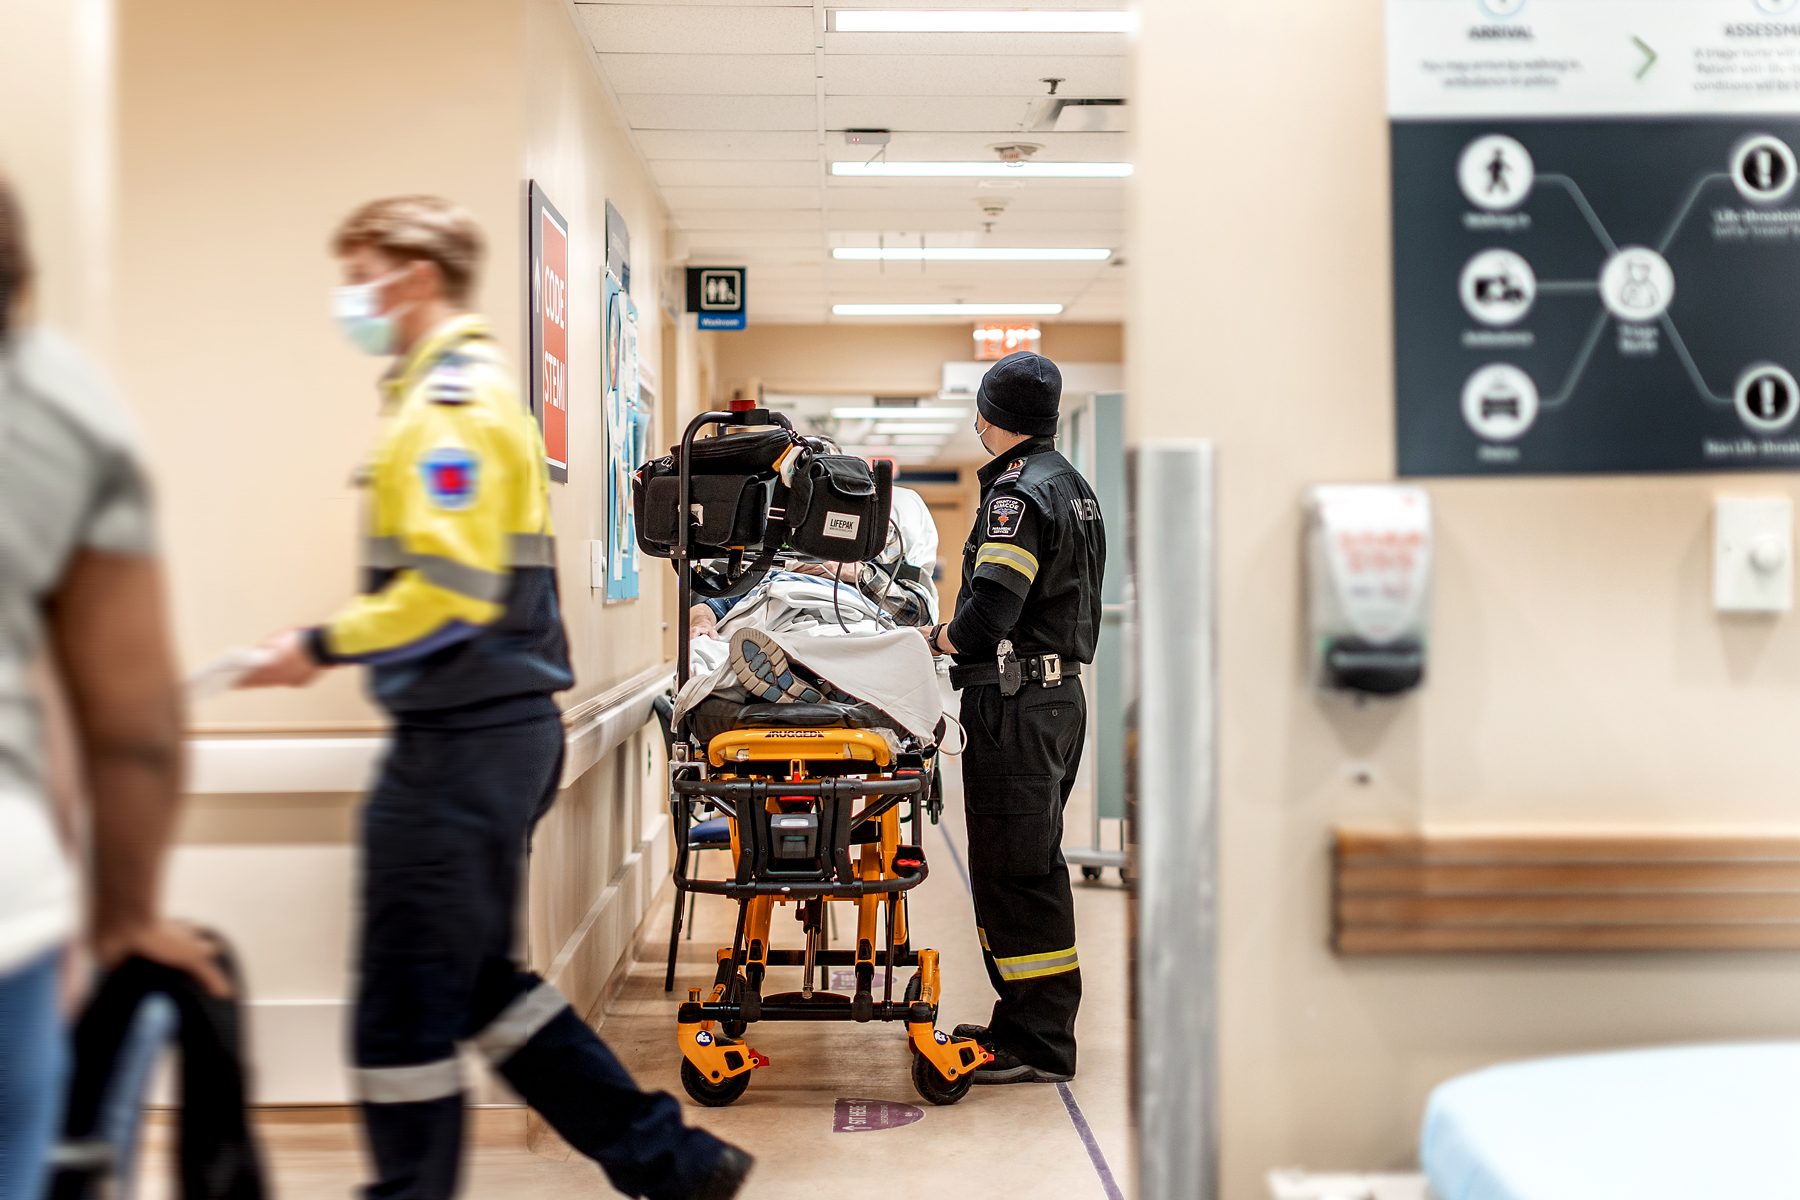 A hospital hallway holds a portable Emergency Services gurney with a patient laying on it. The EMS worker stands next to the gurney and their medical bag hangs from a hook attached to the gurney.